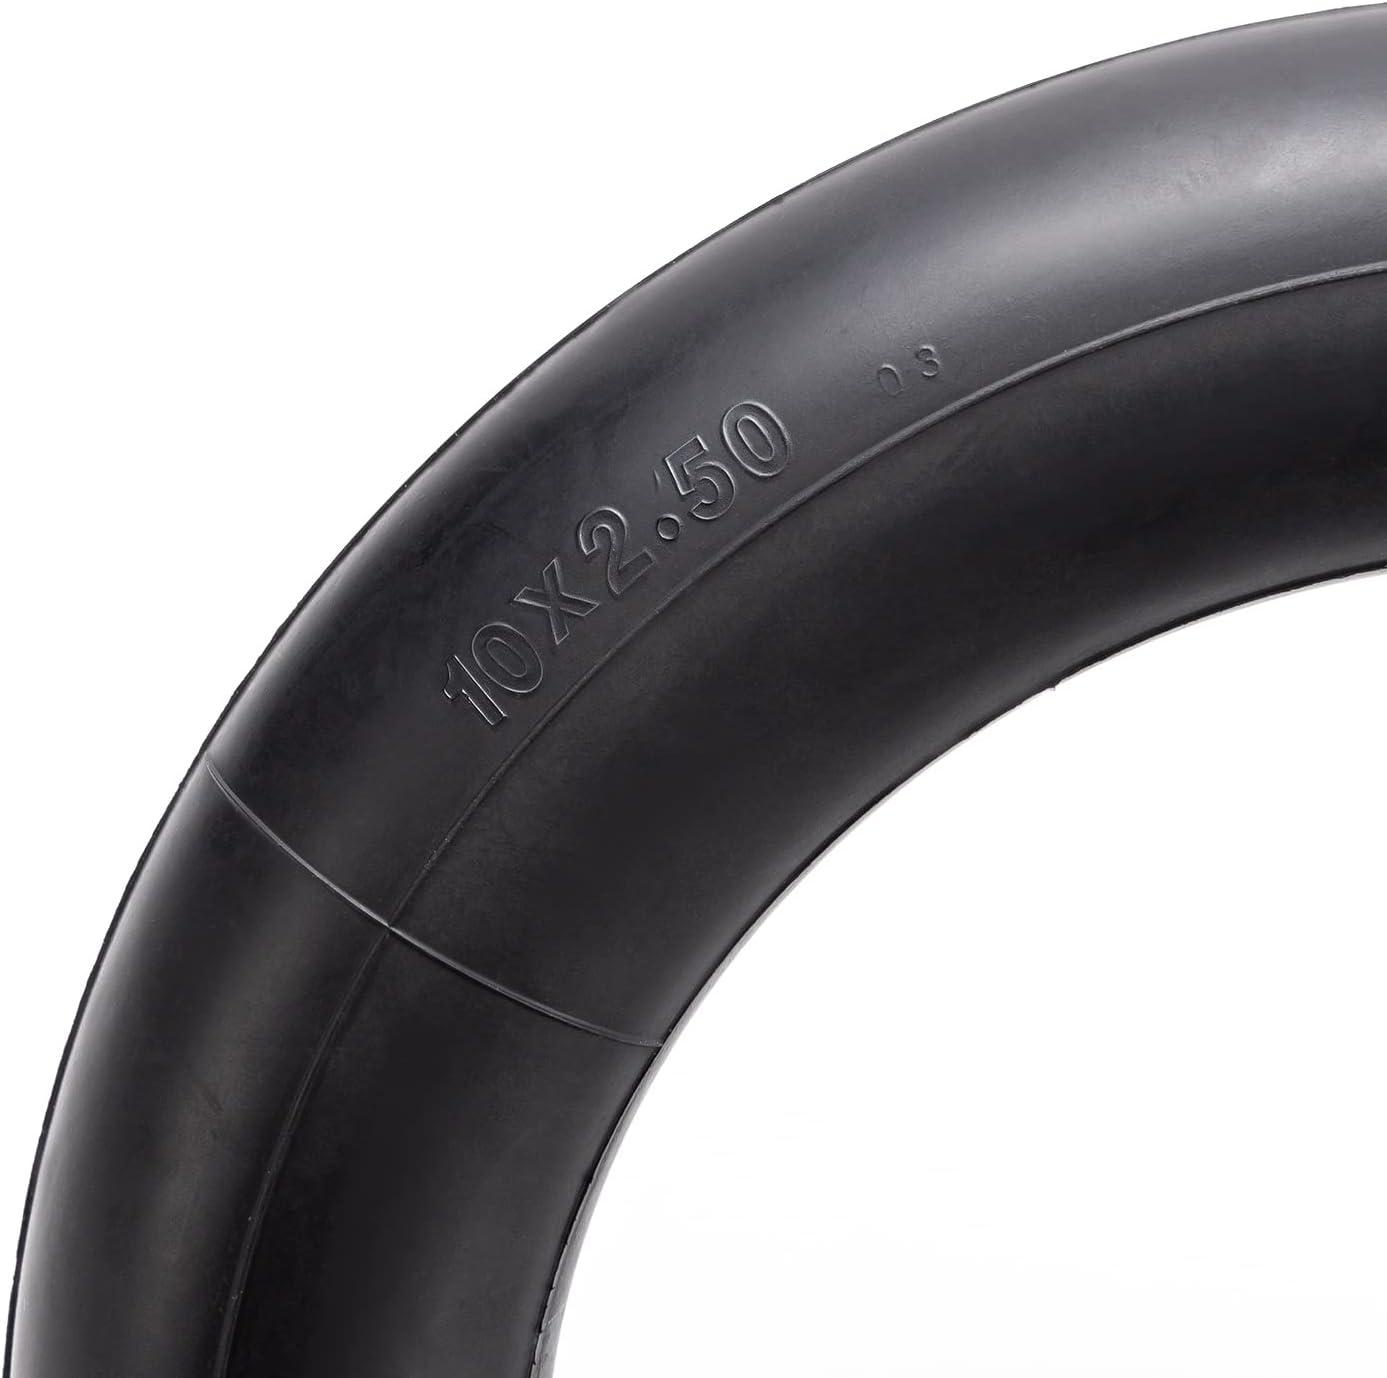 10 Electric Scooter Inner Tube //